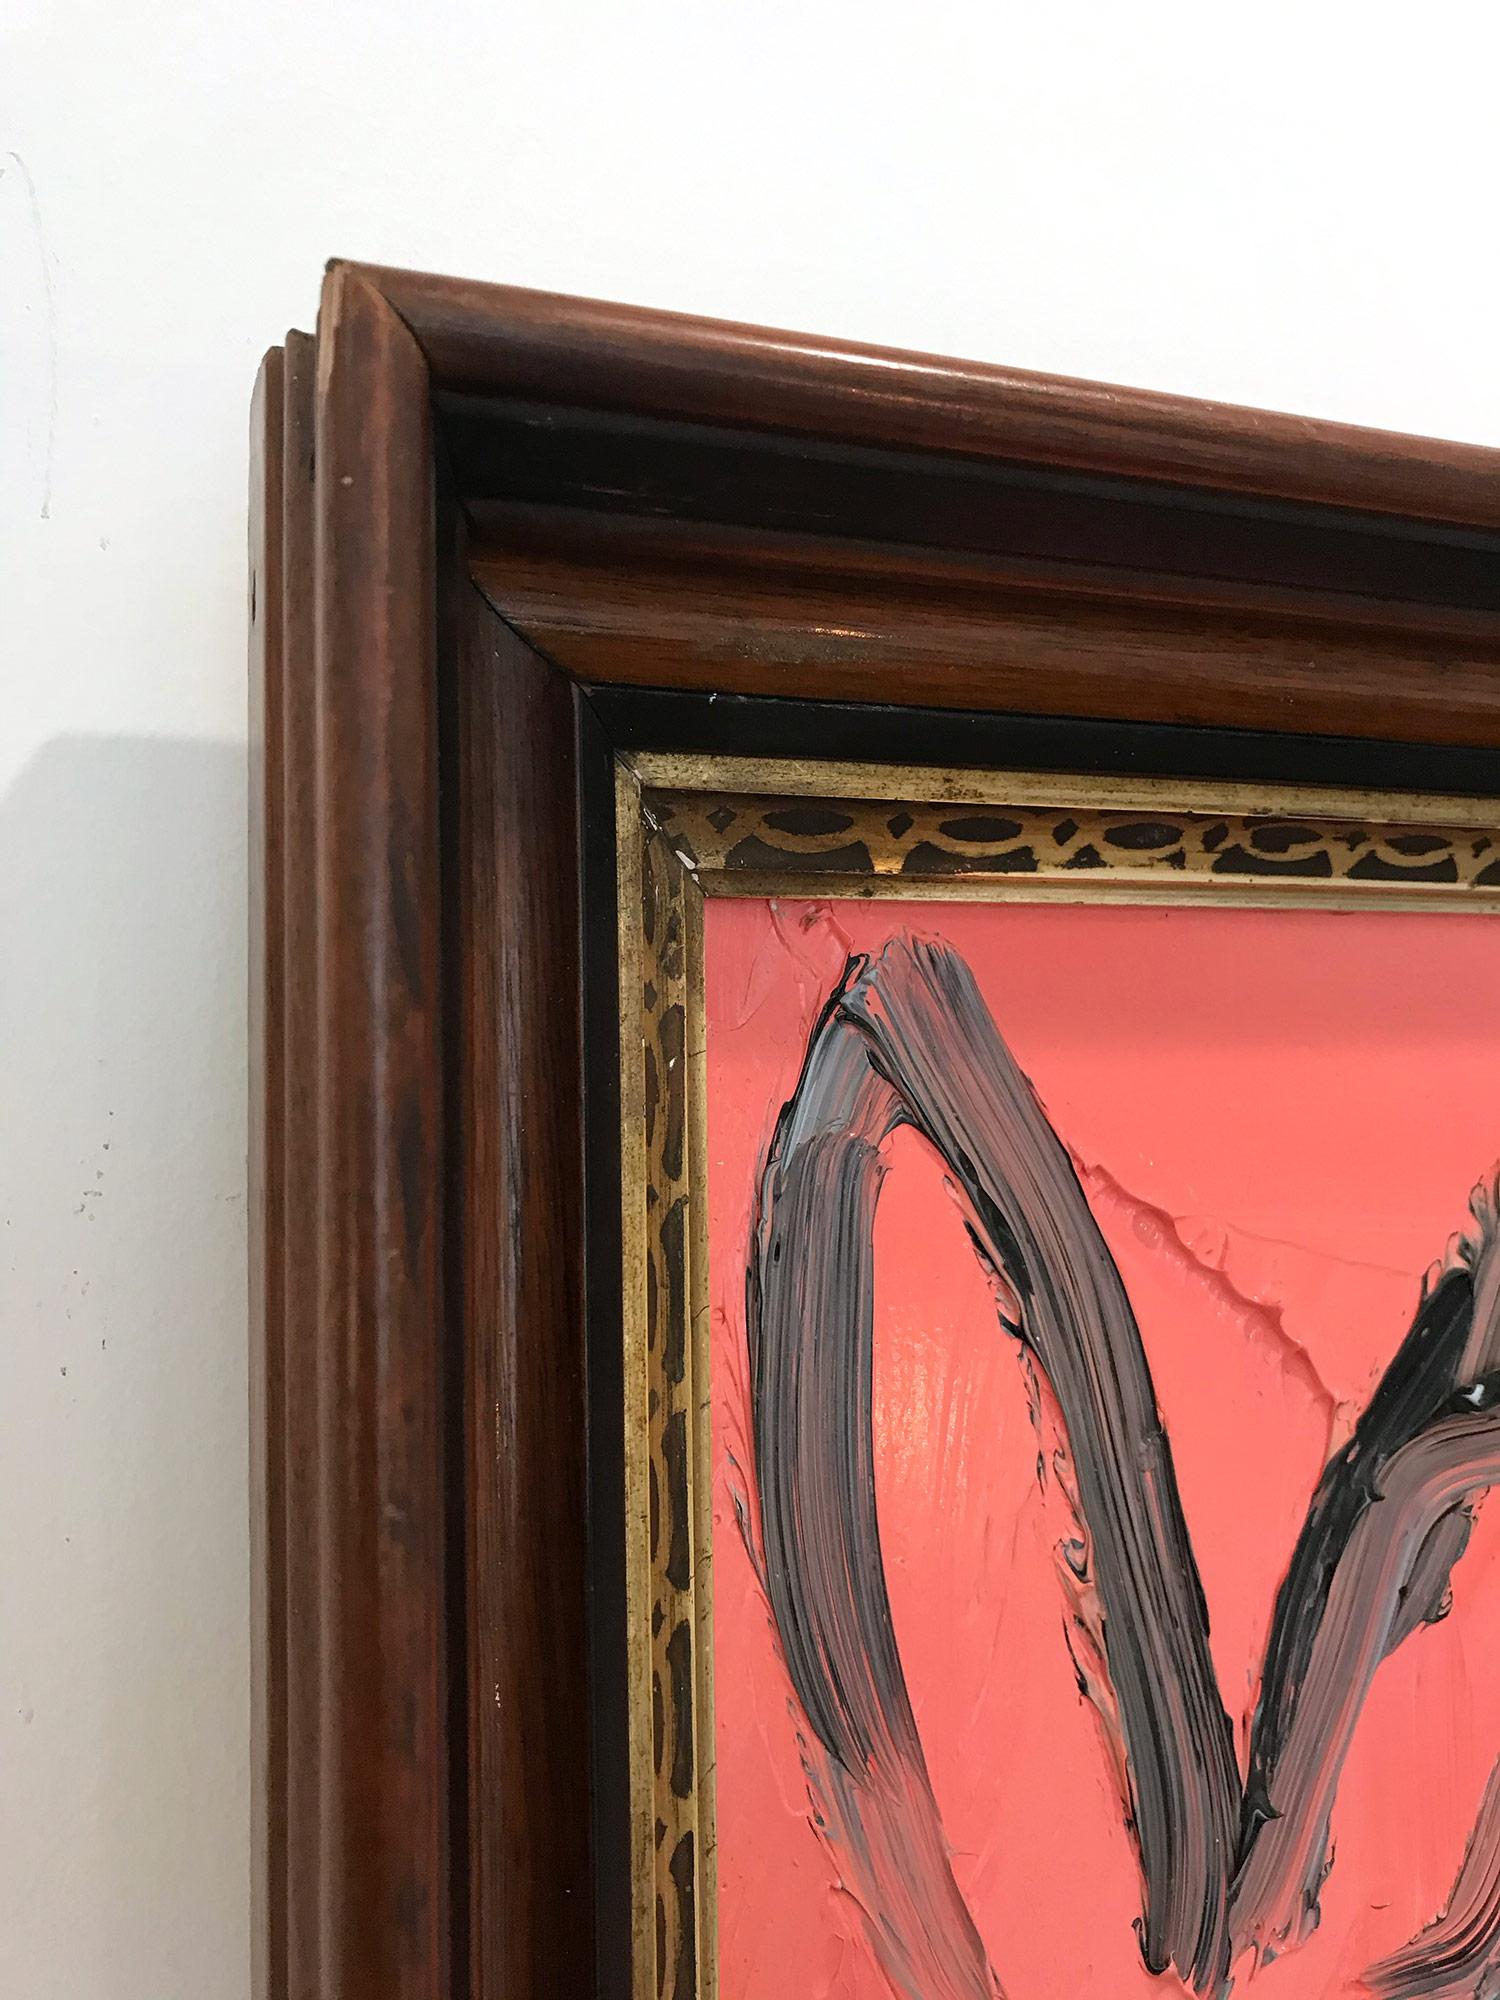 A wonderful composition of one of Slonem's most iconic subjects, Bunnies. This piece depicts a gestural figure of a black bunny peach background with thick use of paint. It is housed in a wonderful antique frame. Inspired by nature and a genuine